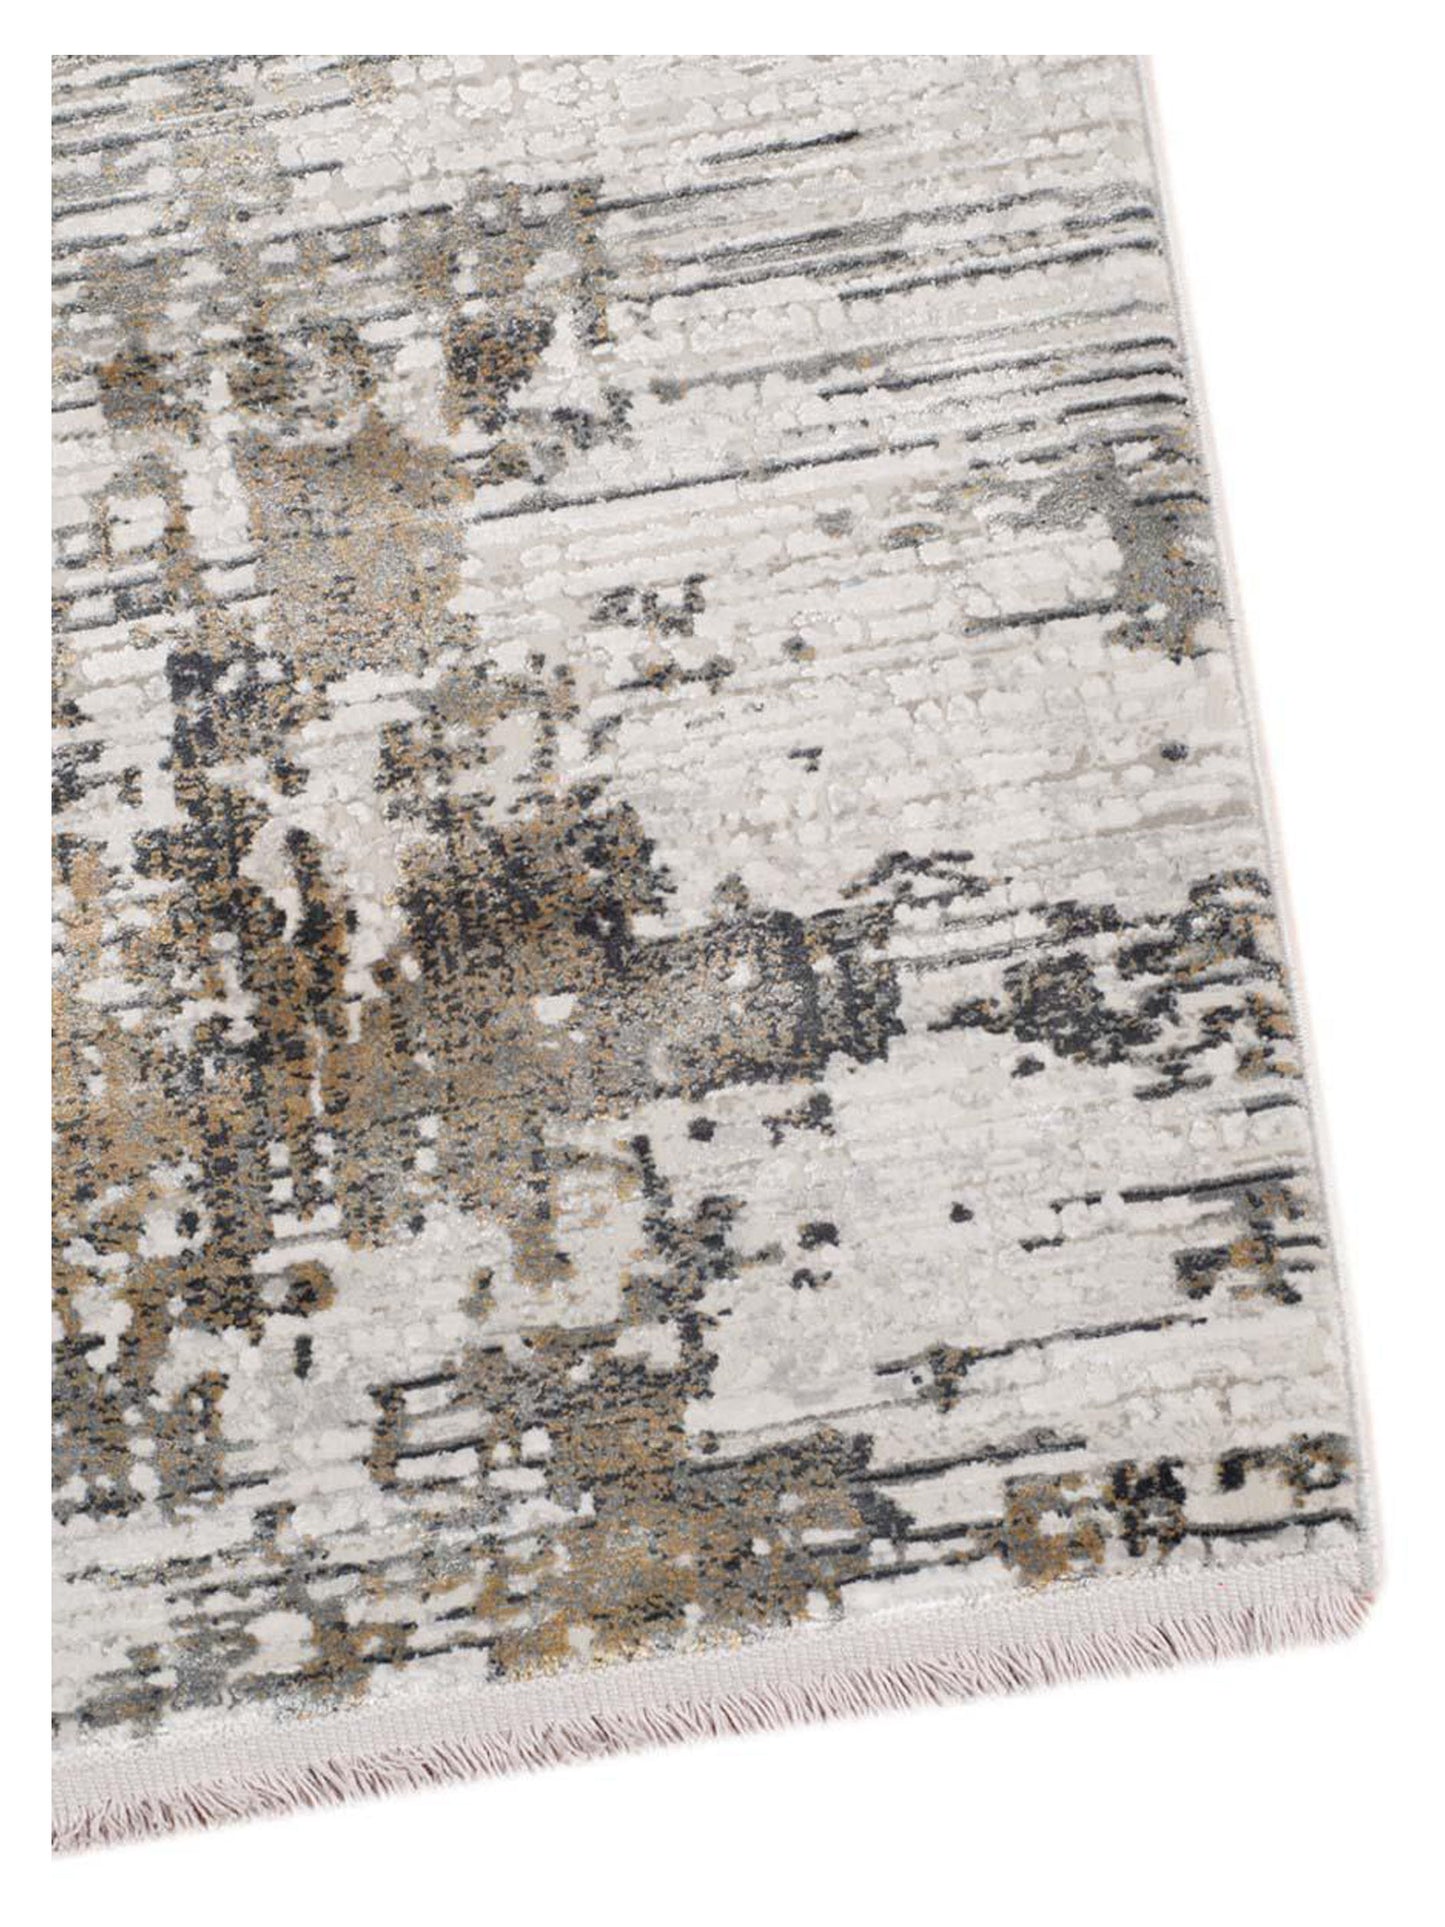 Limited Drew DD-652 IVORY GOLD Transitional Machinemade Rug